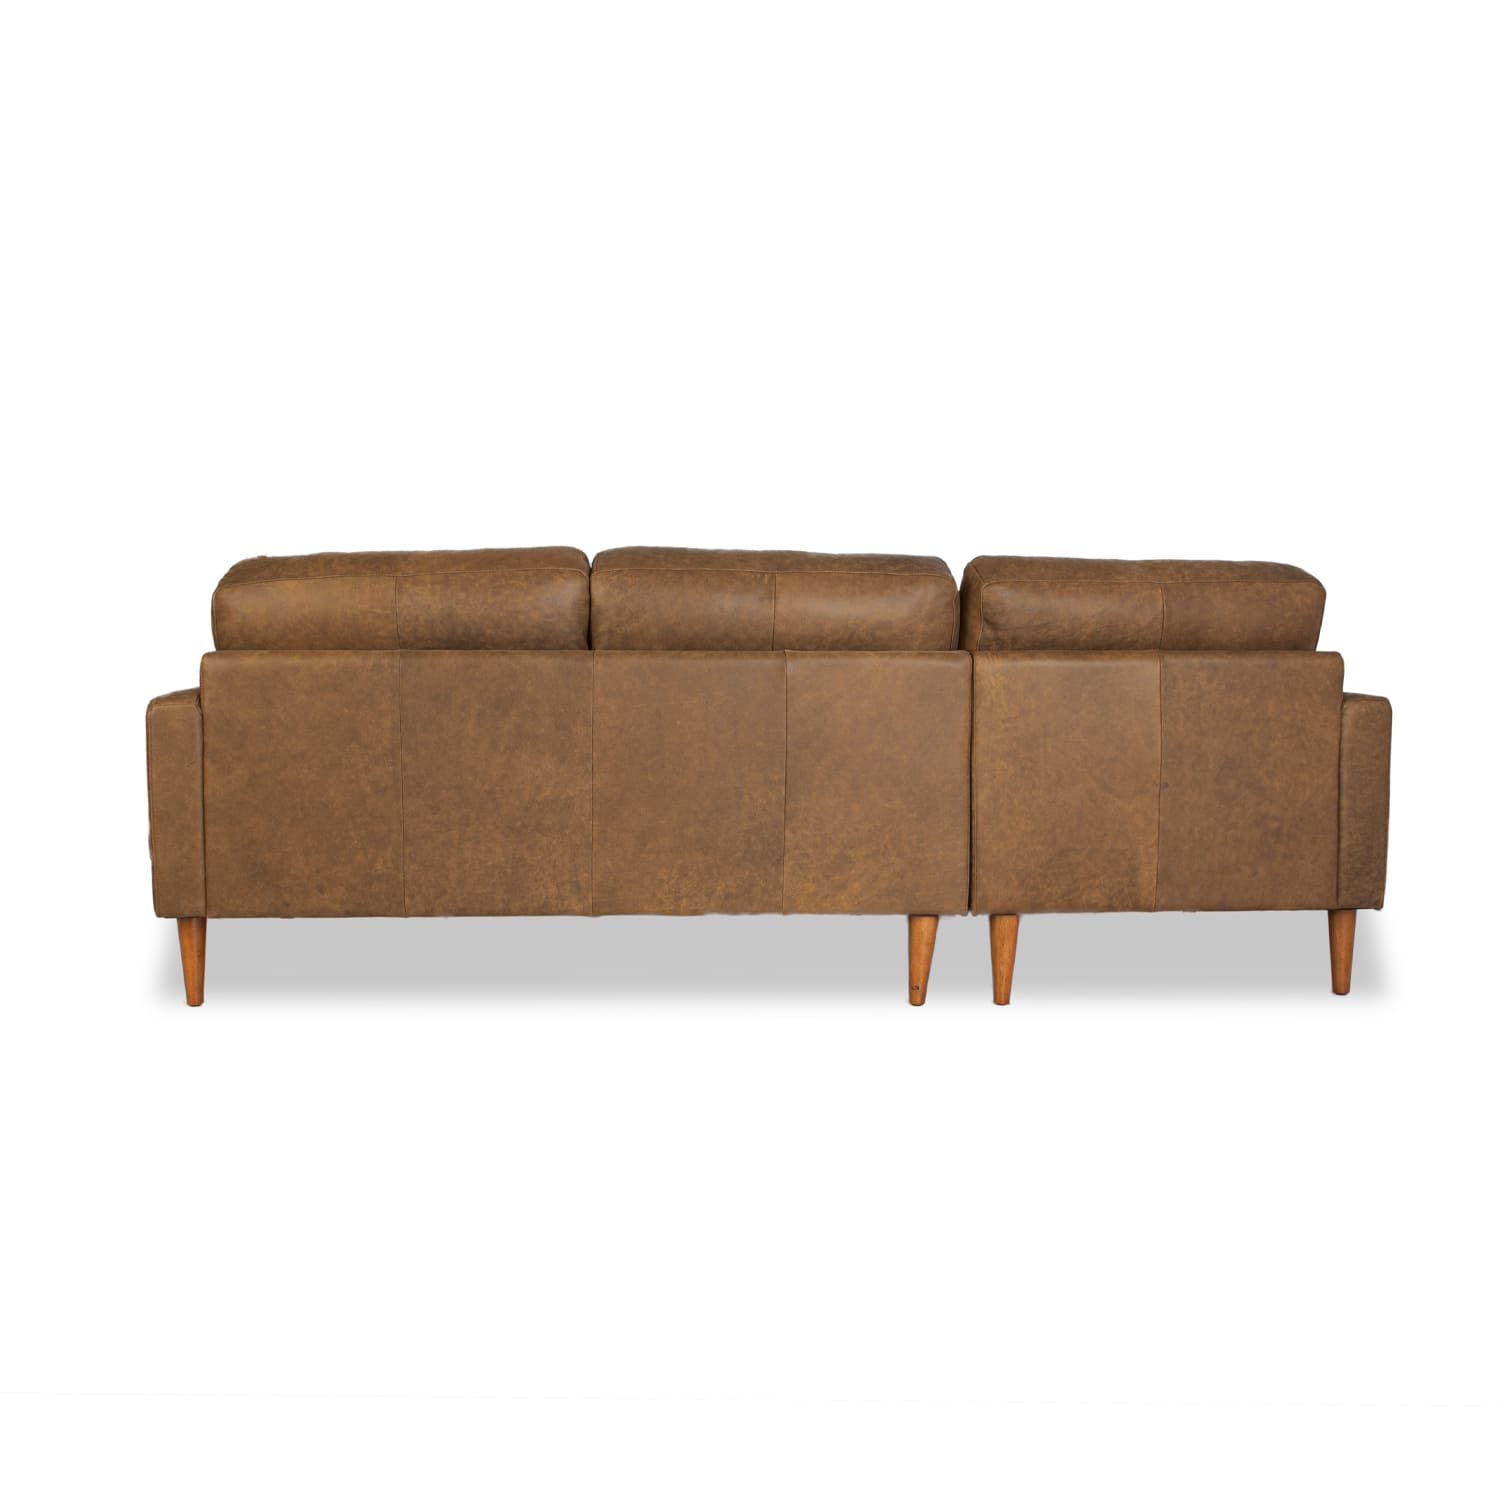 Classic Leather Left Side Facing Chaise Lounge